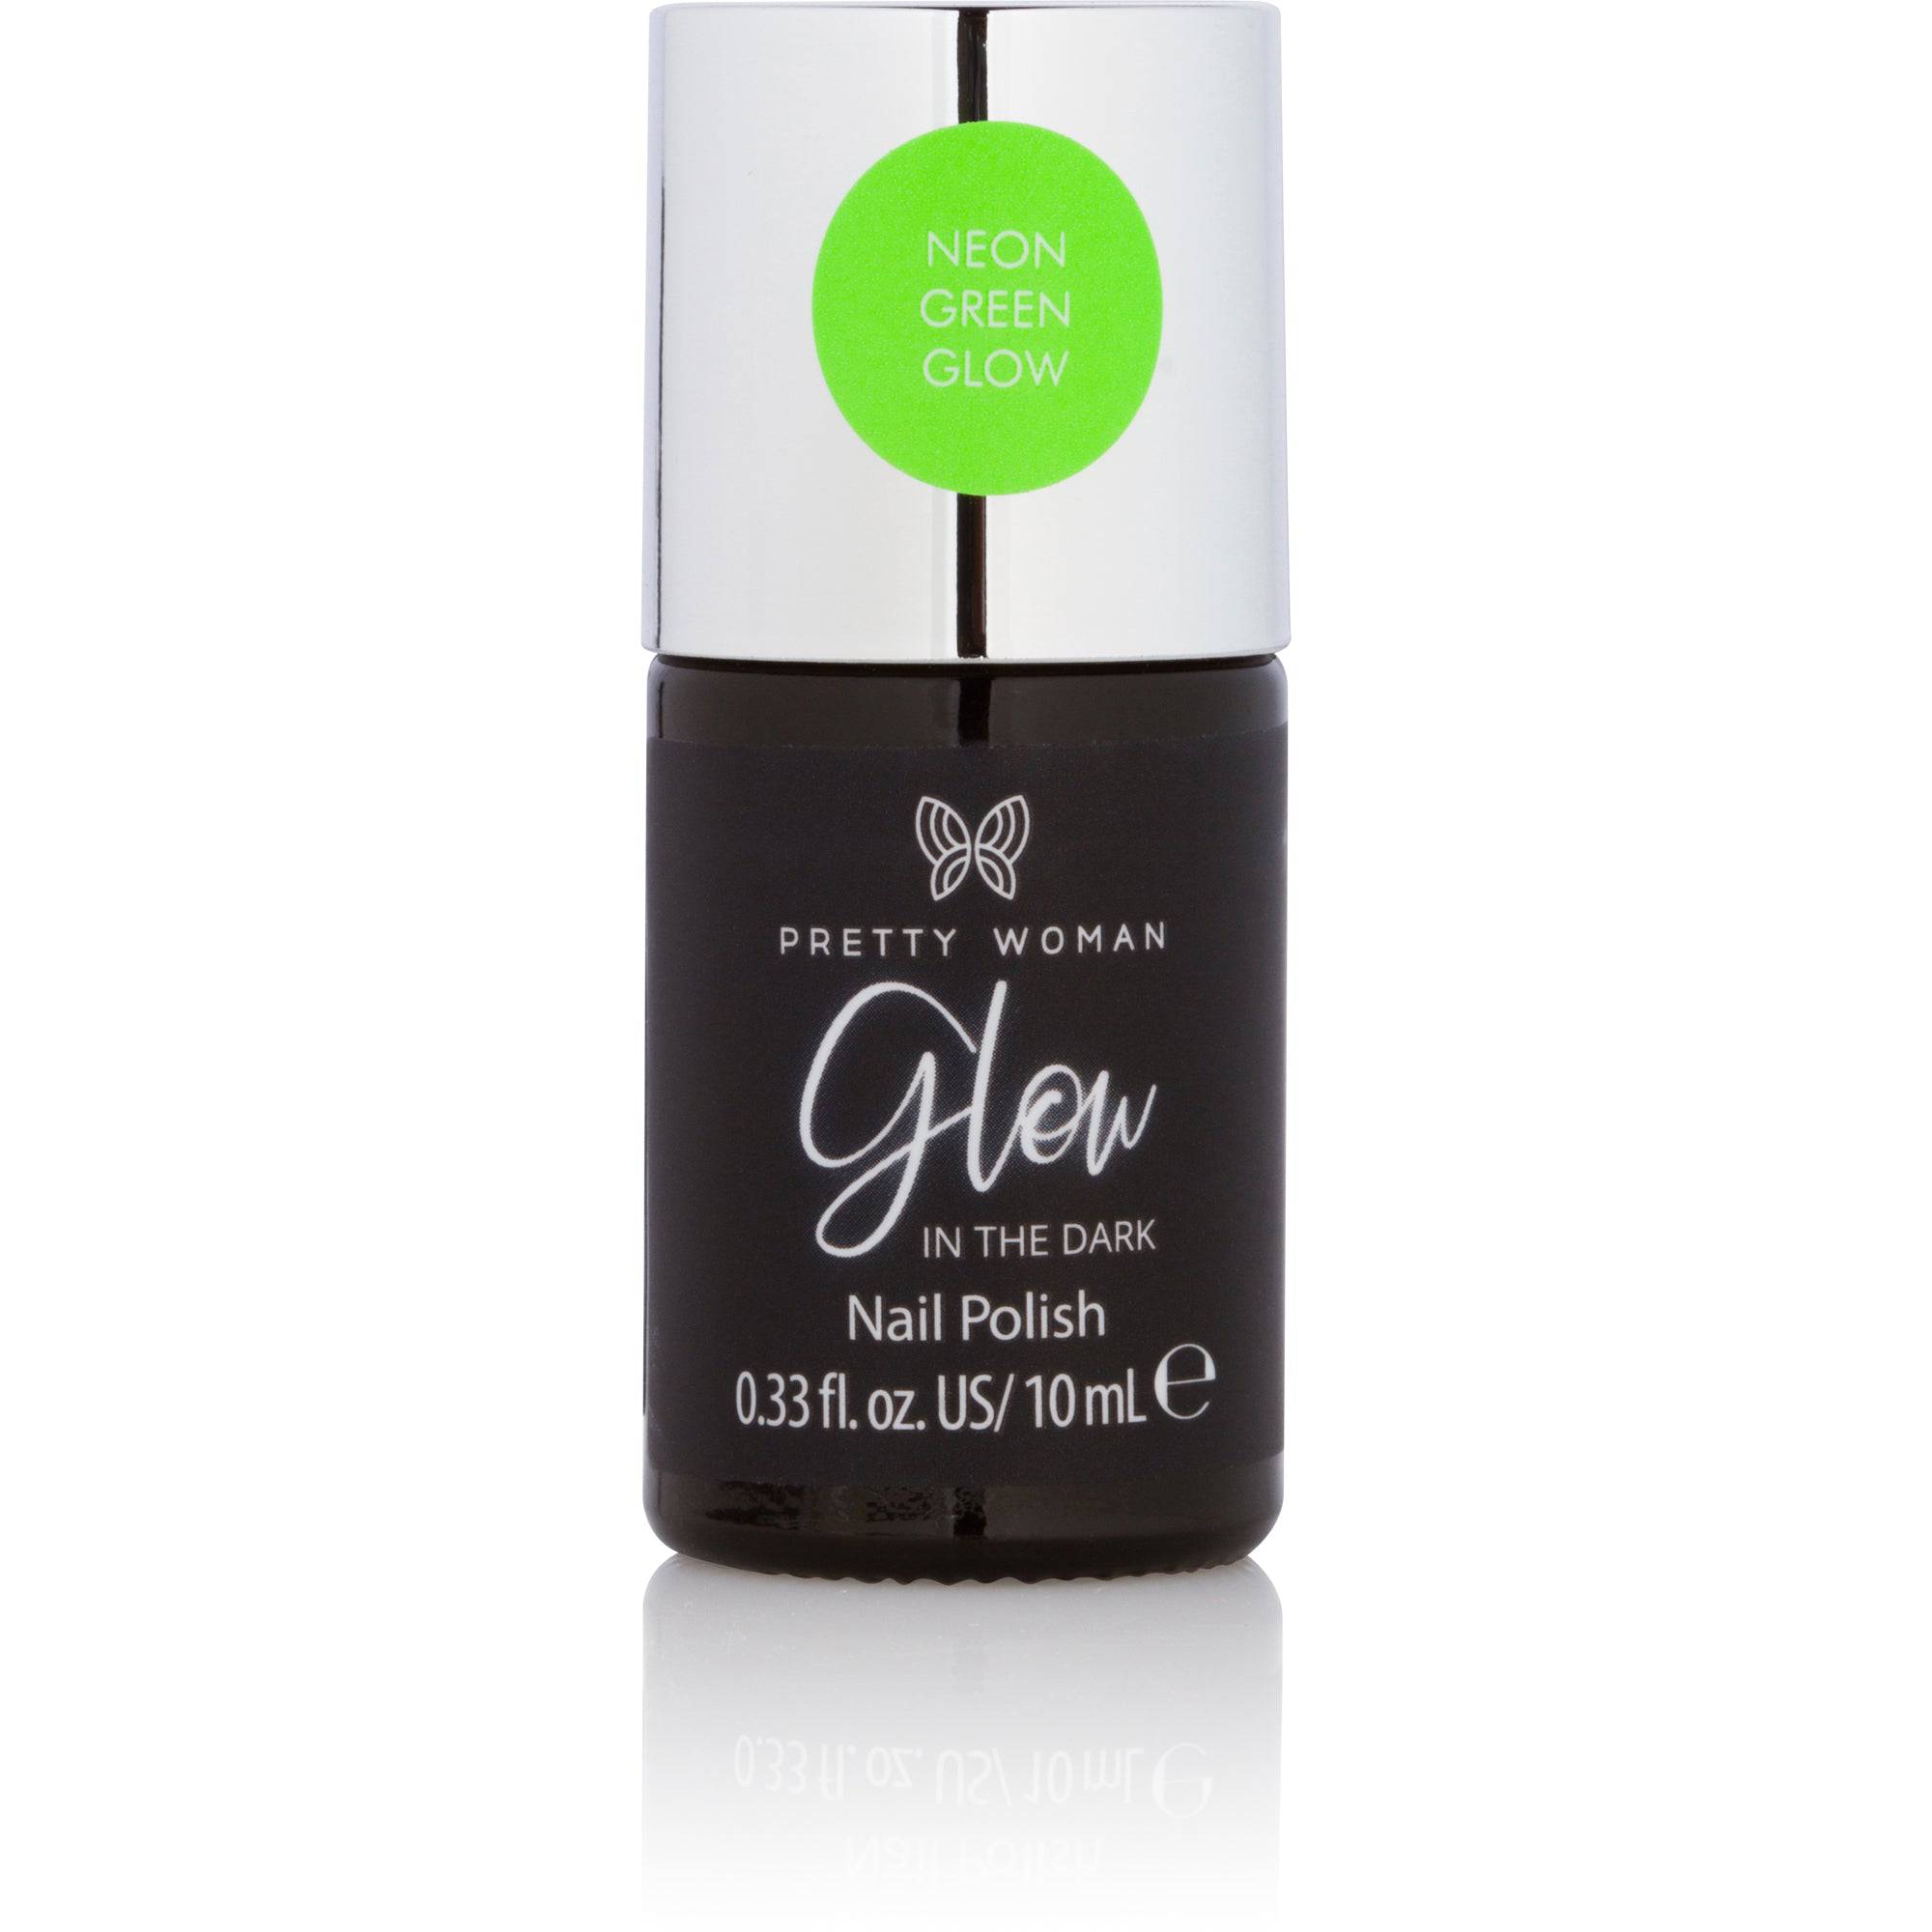 Glow in The Dark Speckled Nail Polish - Fluorescent Green